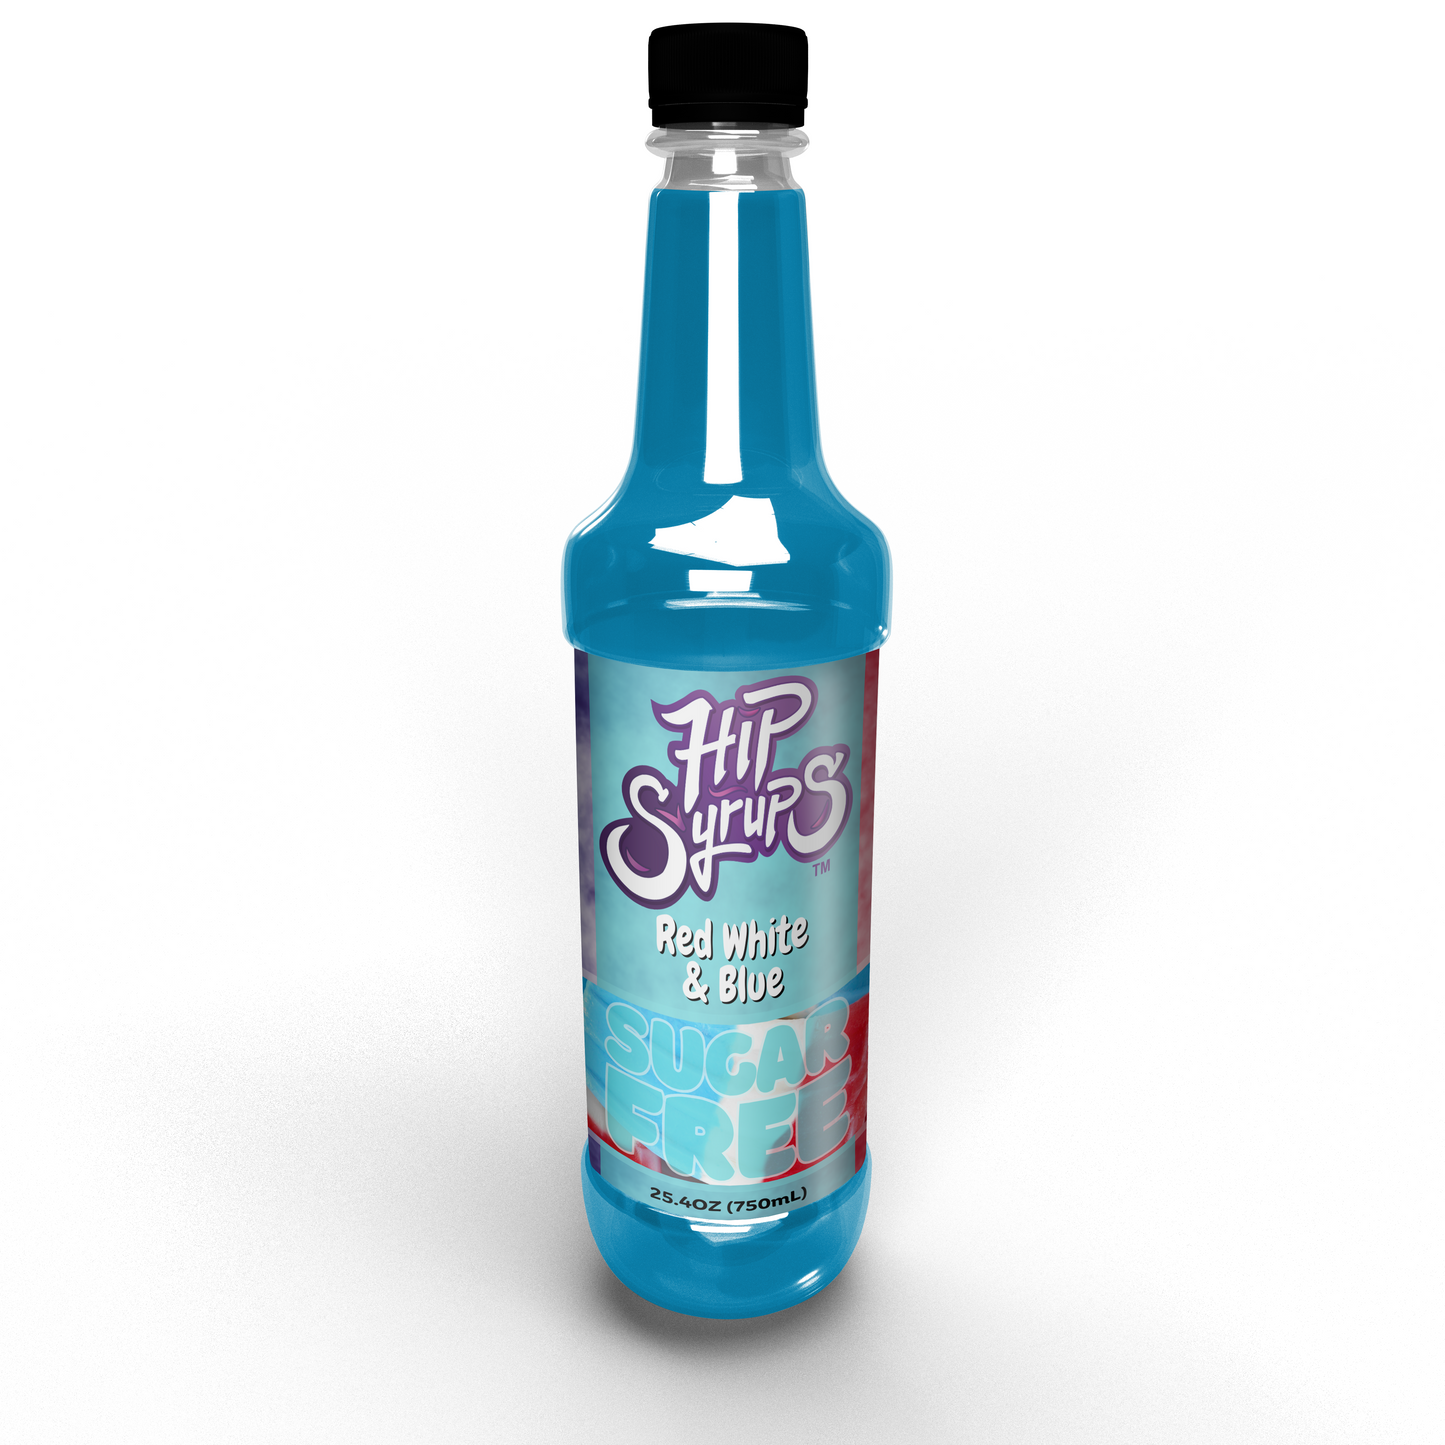 Red White & Blue Sugar Free Hip Syrup - Case of 6 ($8.99ea)